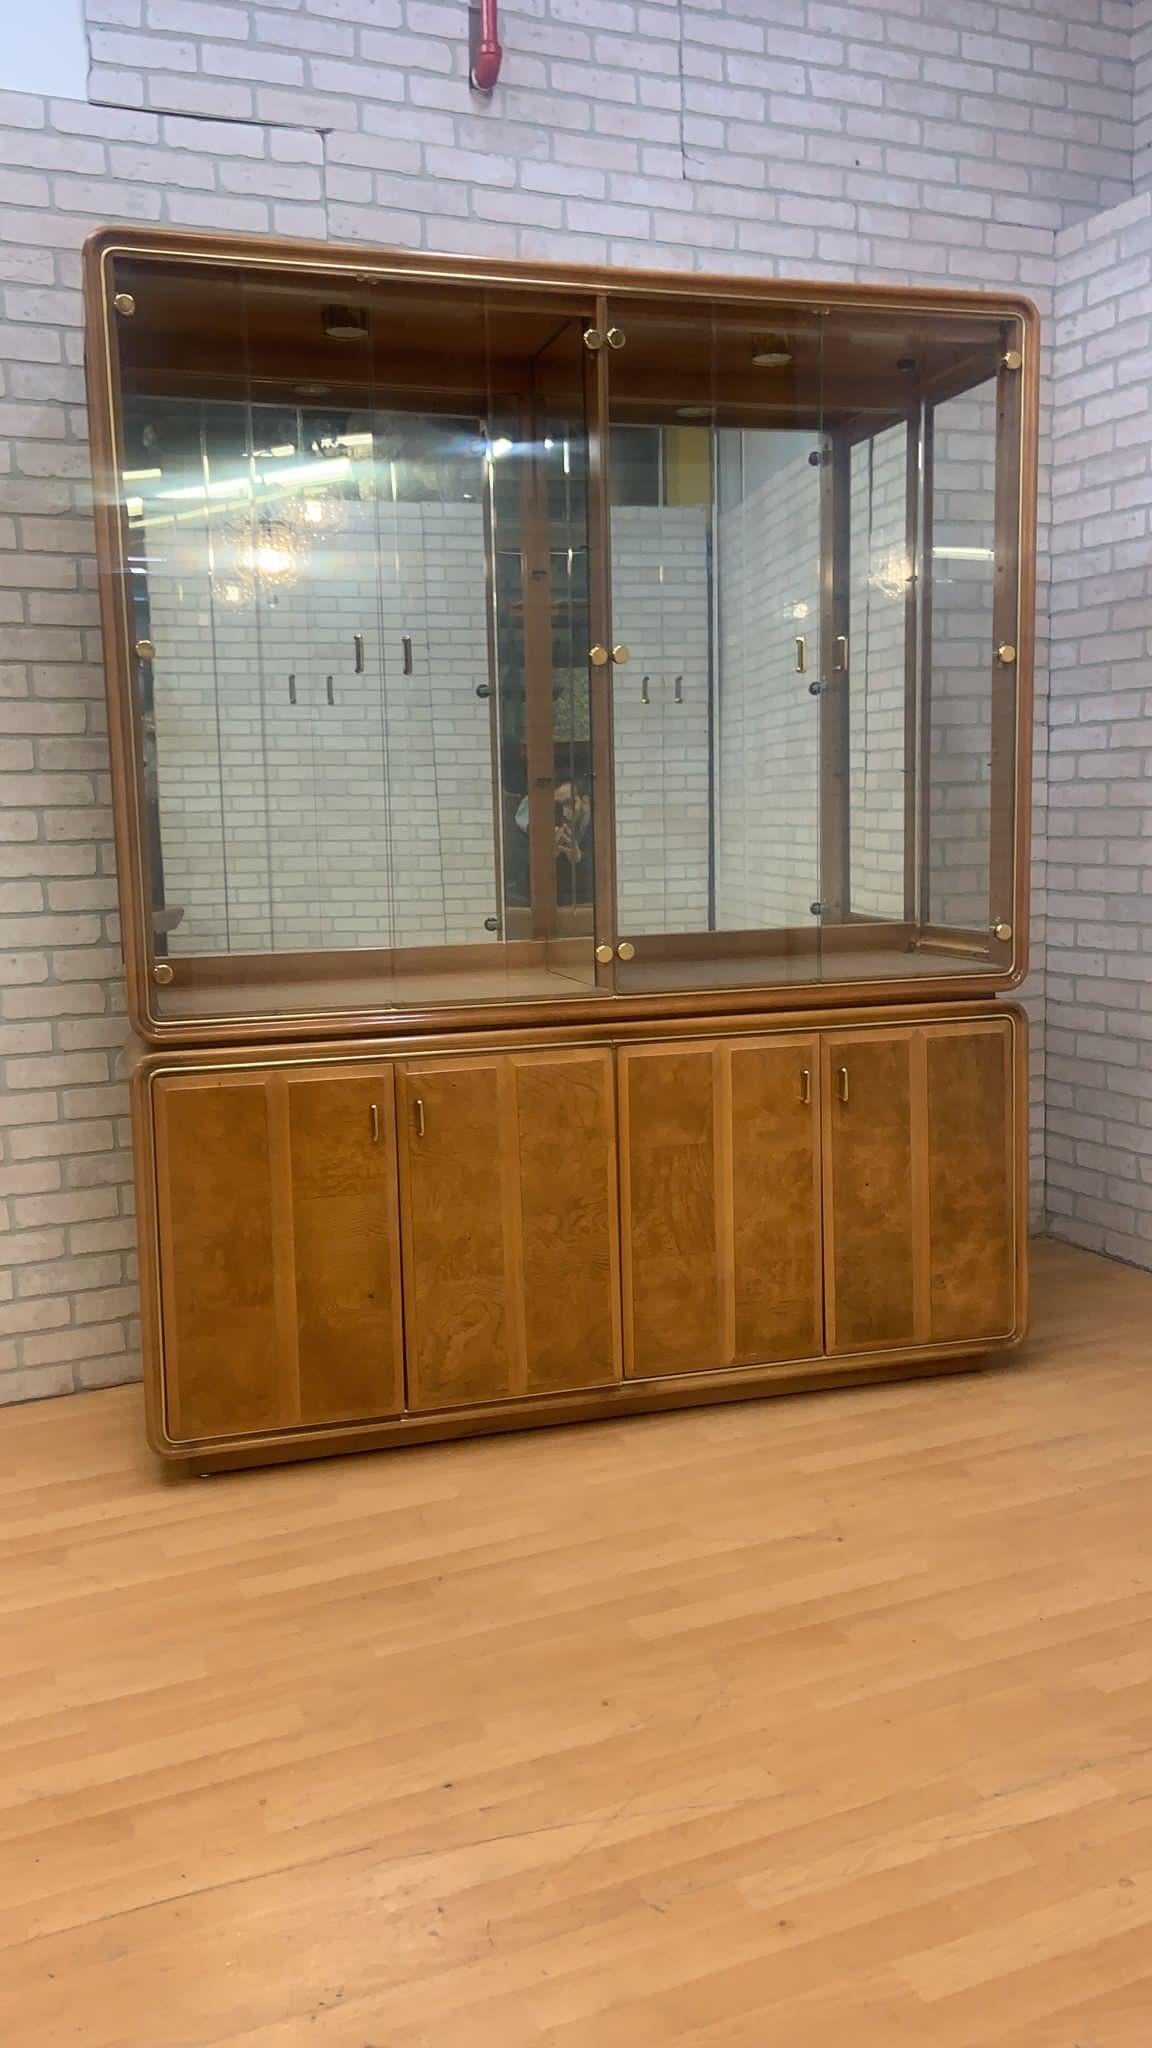 Art Deco American of Martinsville burlwood mirror China cabinet

Stunning Art Deco American of Martinsville mirrored olive wood burl china cabinet from American of Martinsville. Upper section features four glass doors with floating brass hardware,